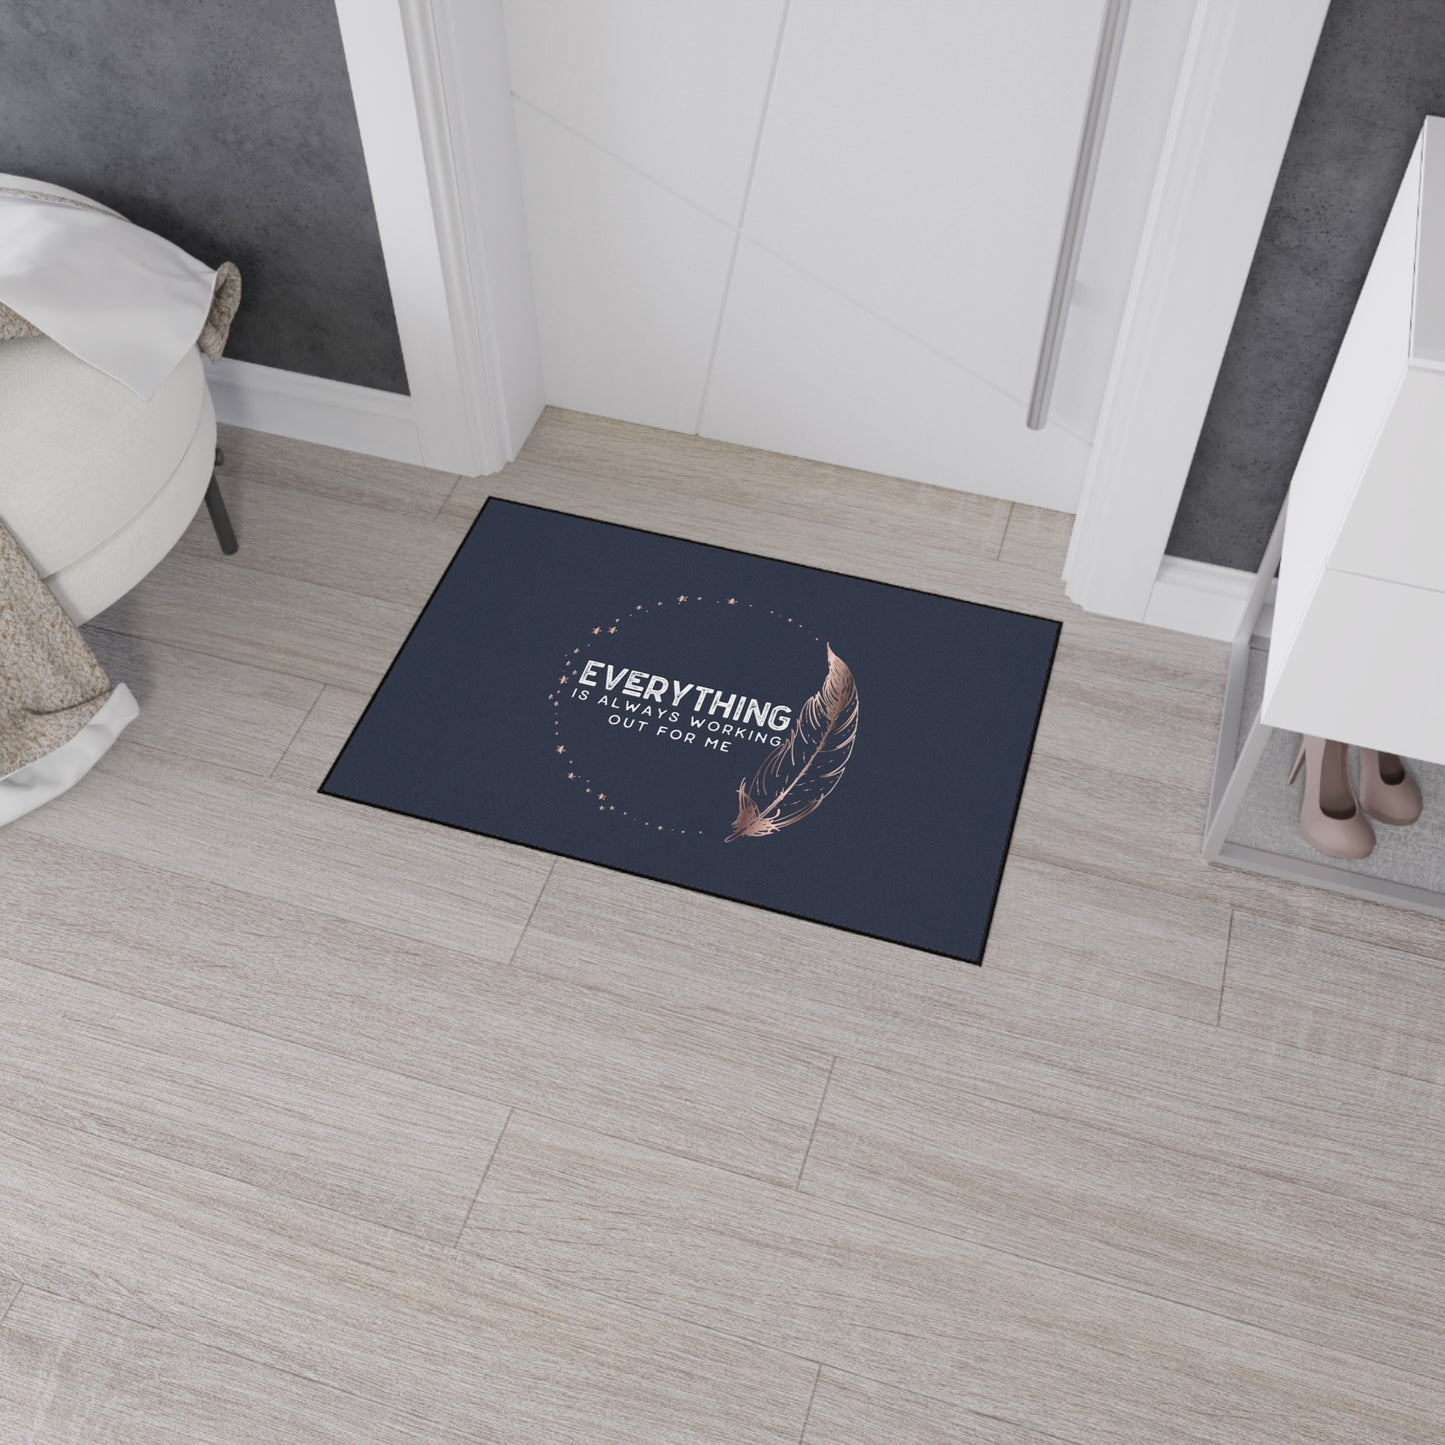 INSPIRED Everything Is Always... Heavy Duty Floor Mat